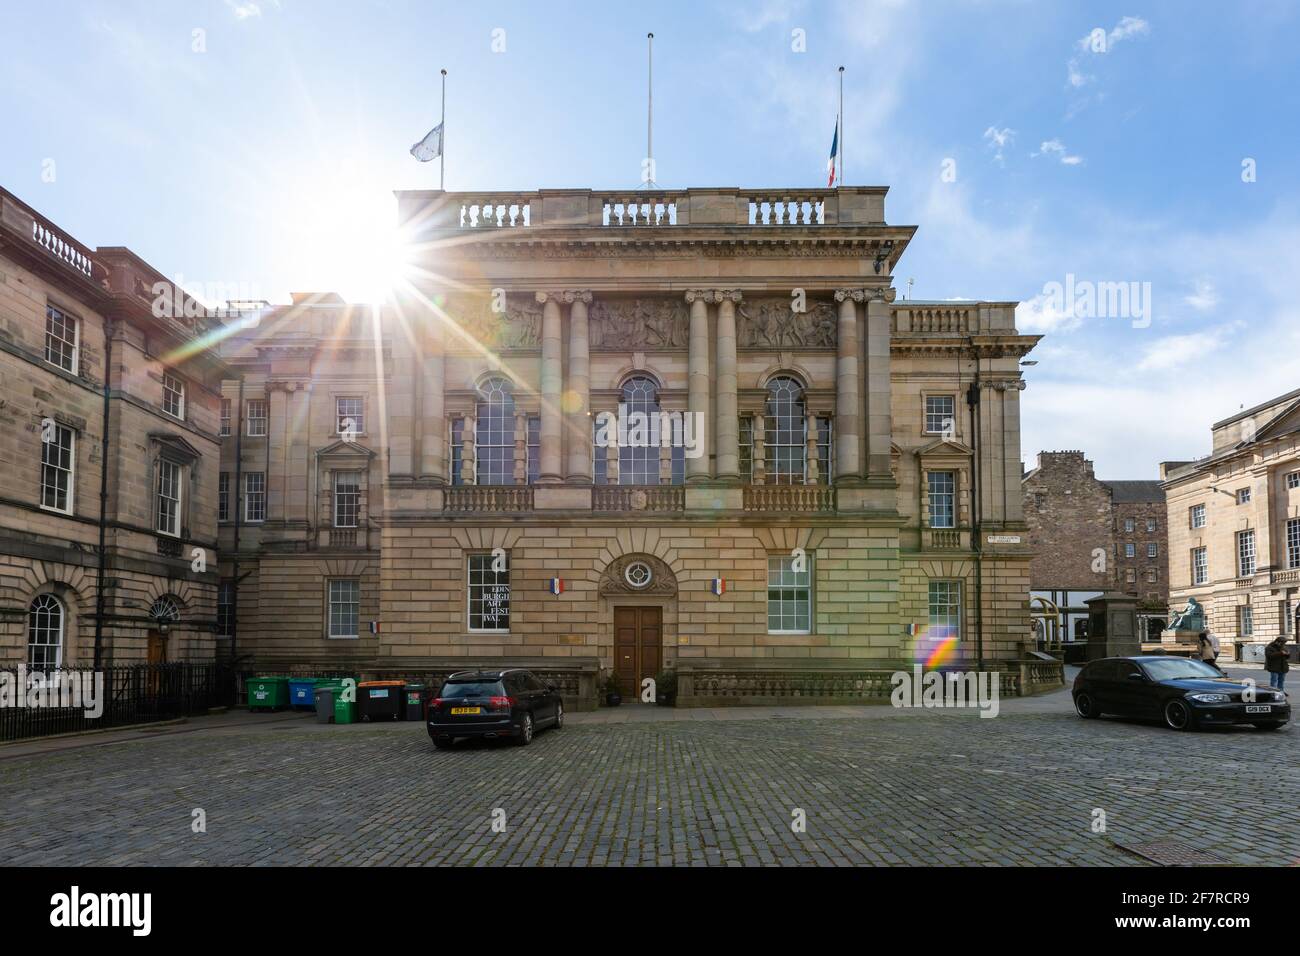 Edinburgh, UK. 9th Apr 2021. Flags on The Consulate General of France in Edinburgh fly at half mast after the announcement of the death of Prince Philip The Duke of Edinburgh Credit: David Coulson/Alamy Live News Stock Photo